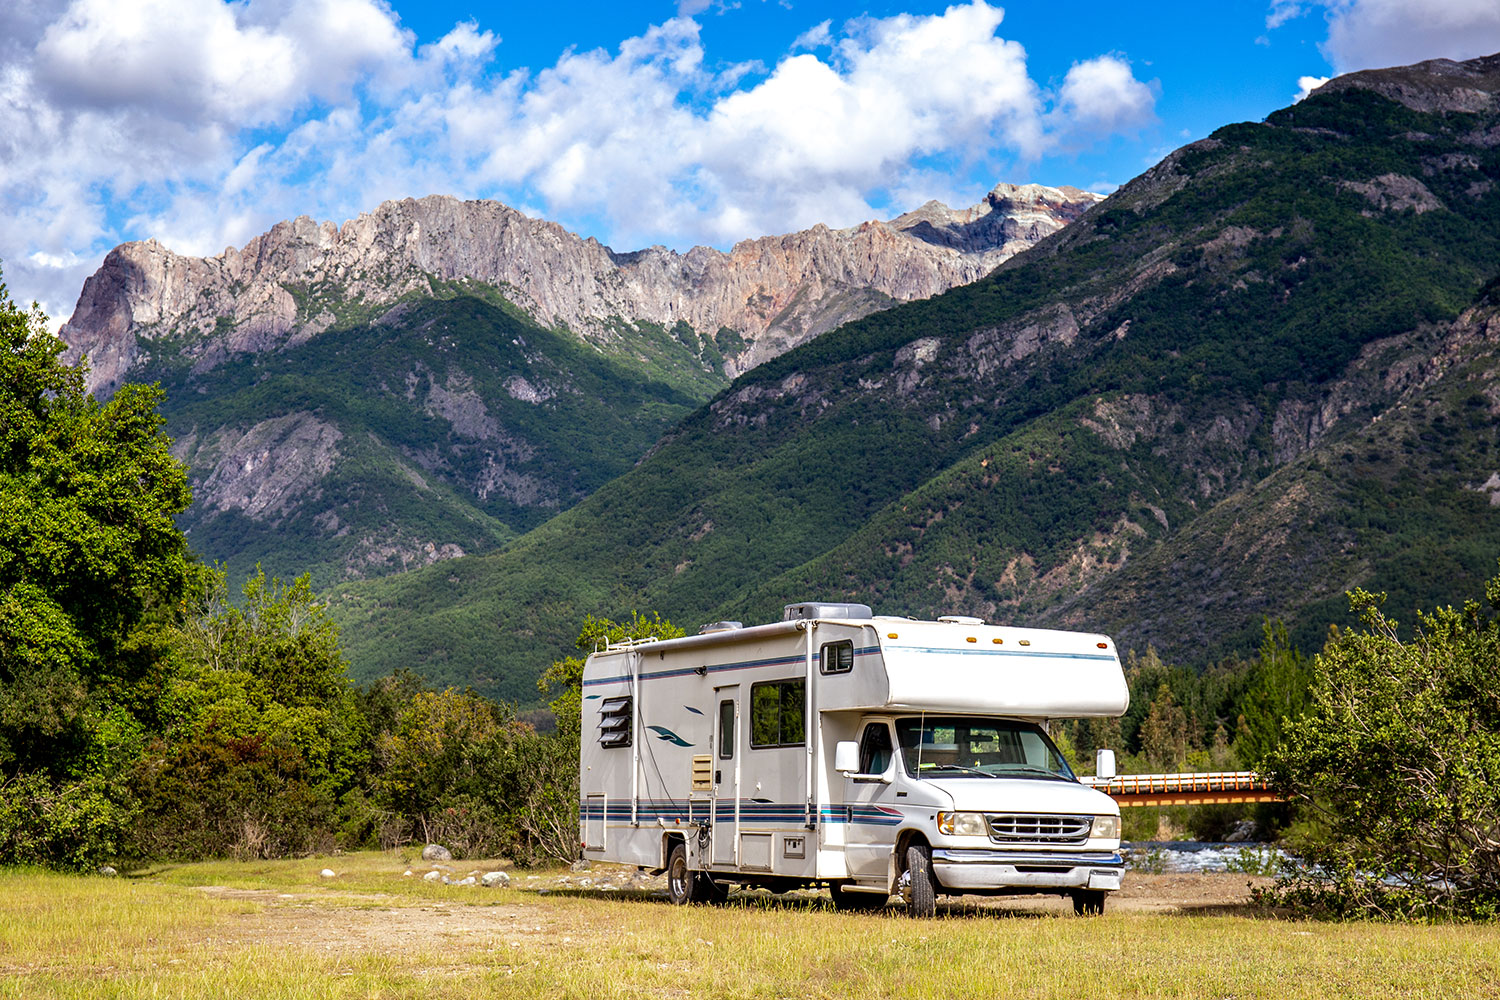 Motorhome parked in the mountains